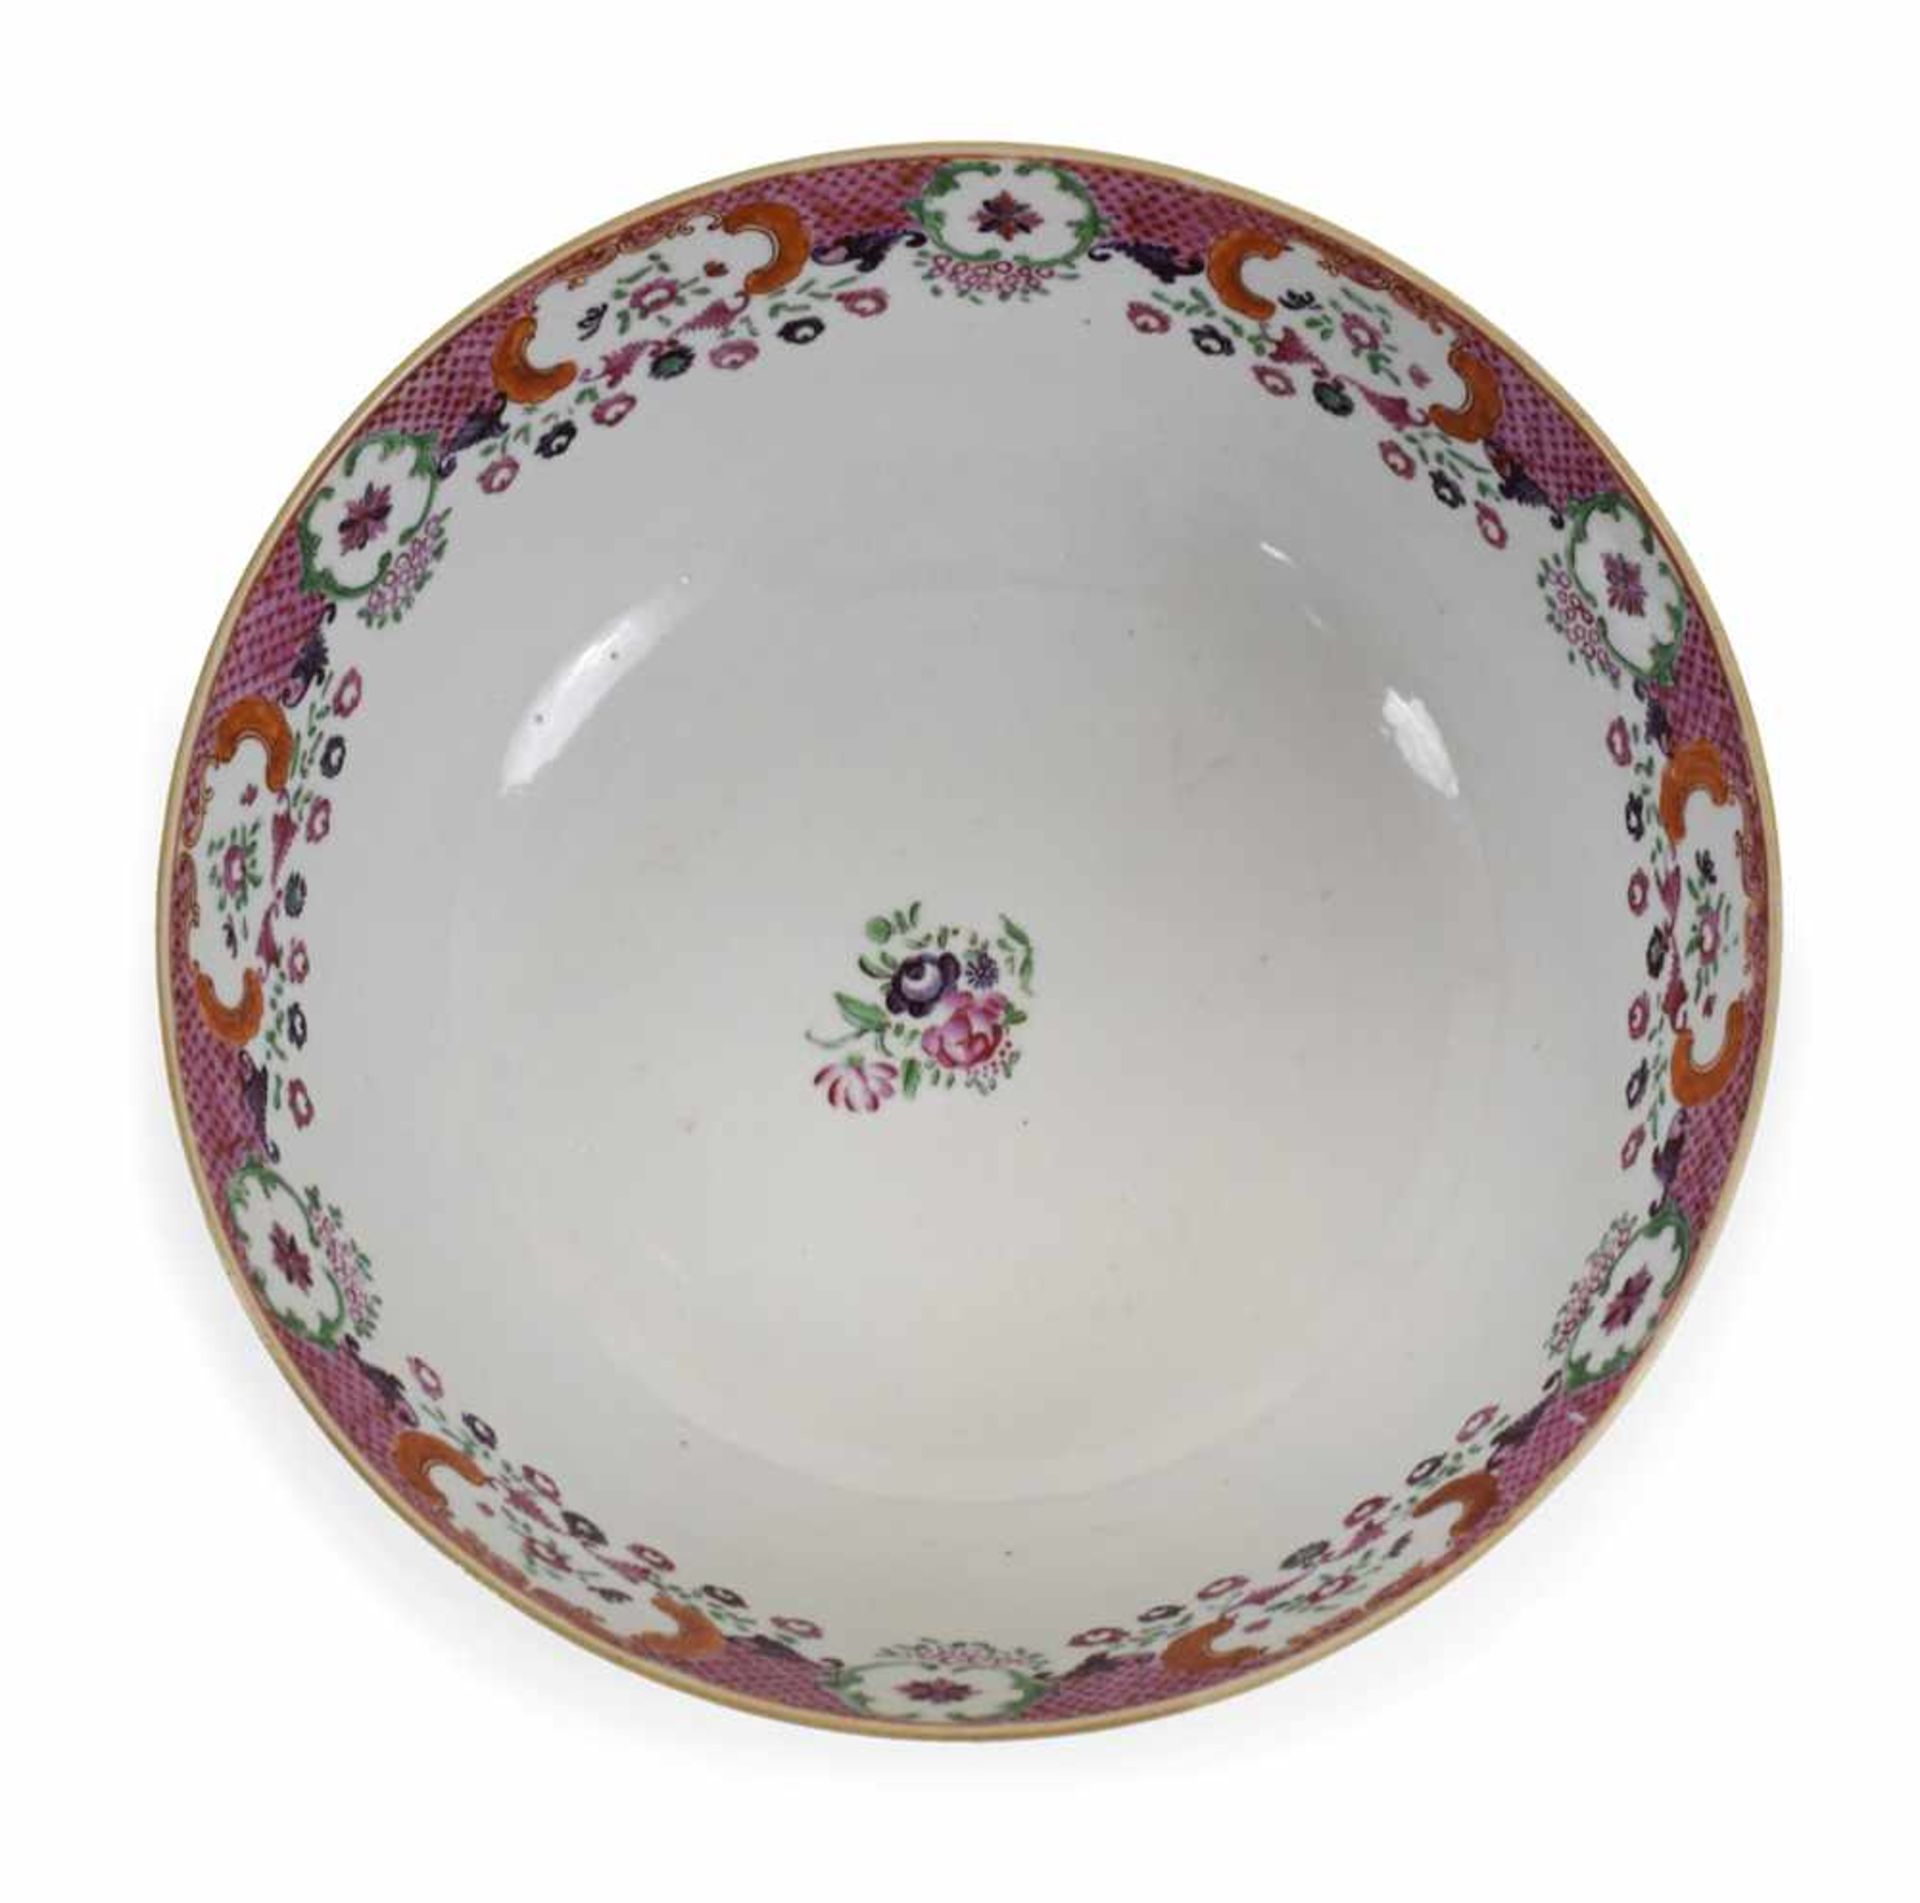 PUNCH BOWL, FAMILLE ROSECHINA, 18. JH.D. 26,3 CM- - -33.00 % buyer's premium on the hammer